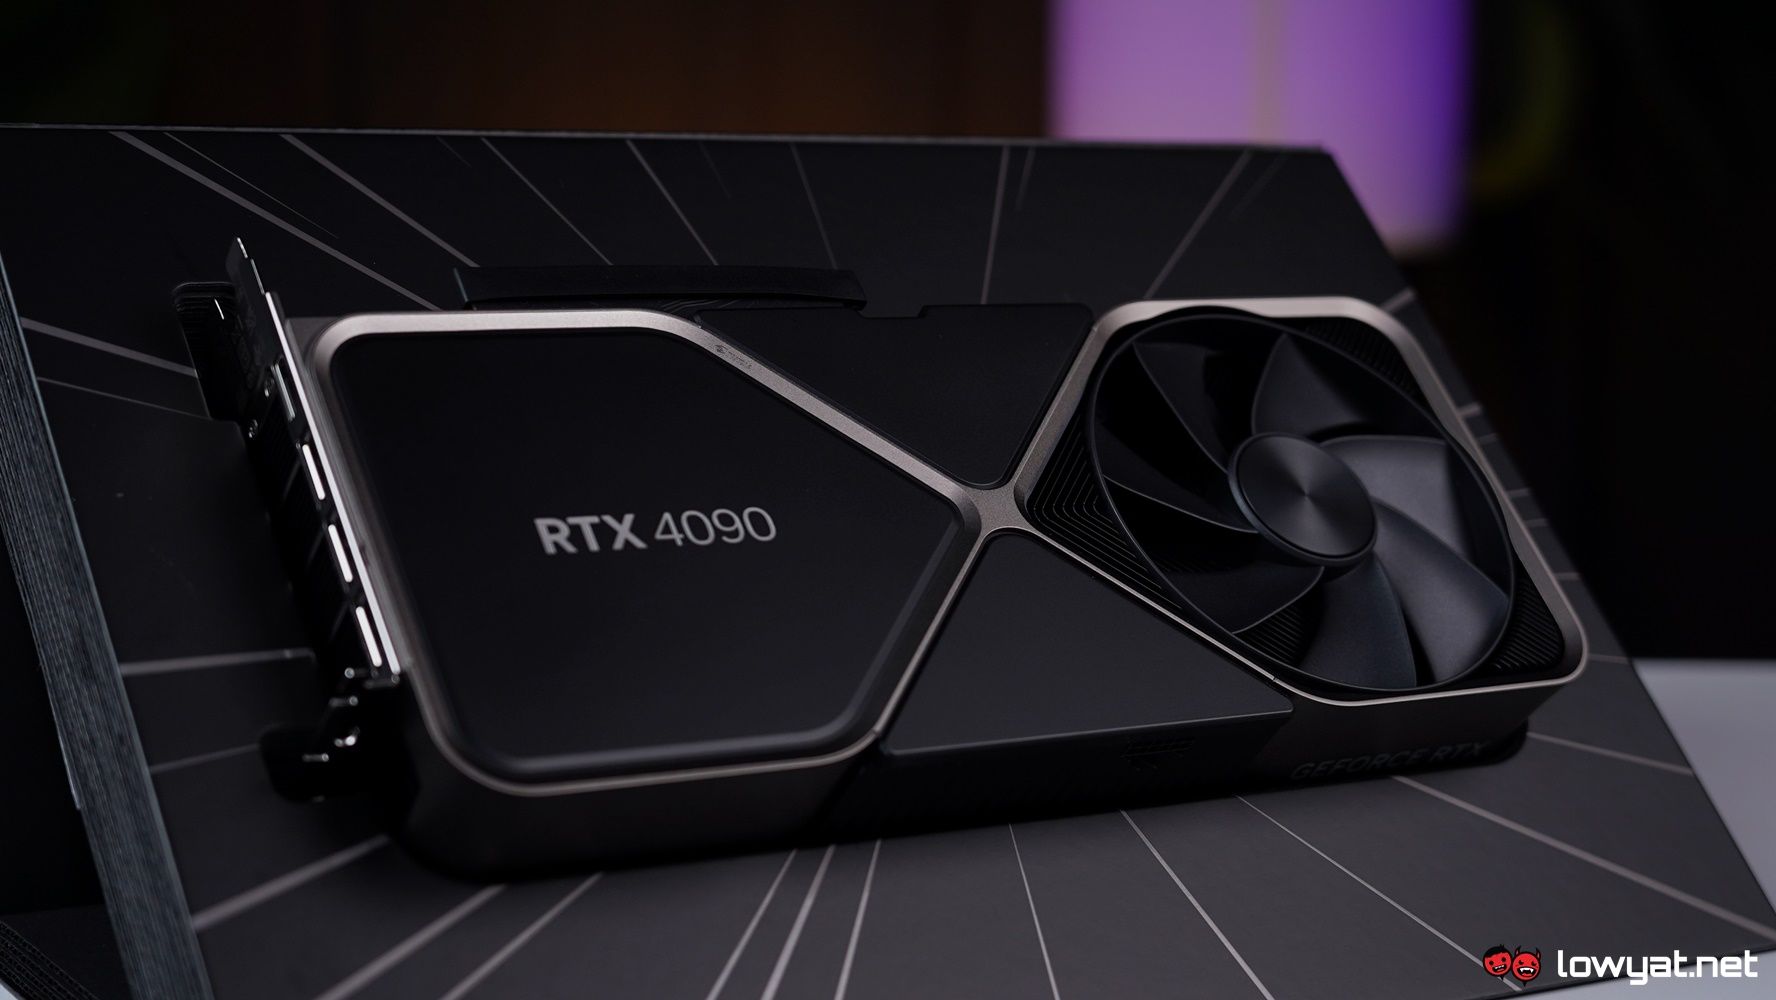 Nvidia GeForce RTX 4090 Review